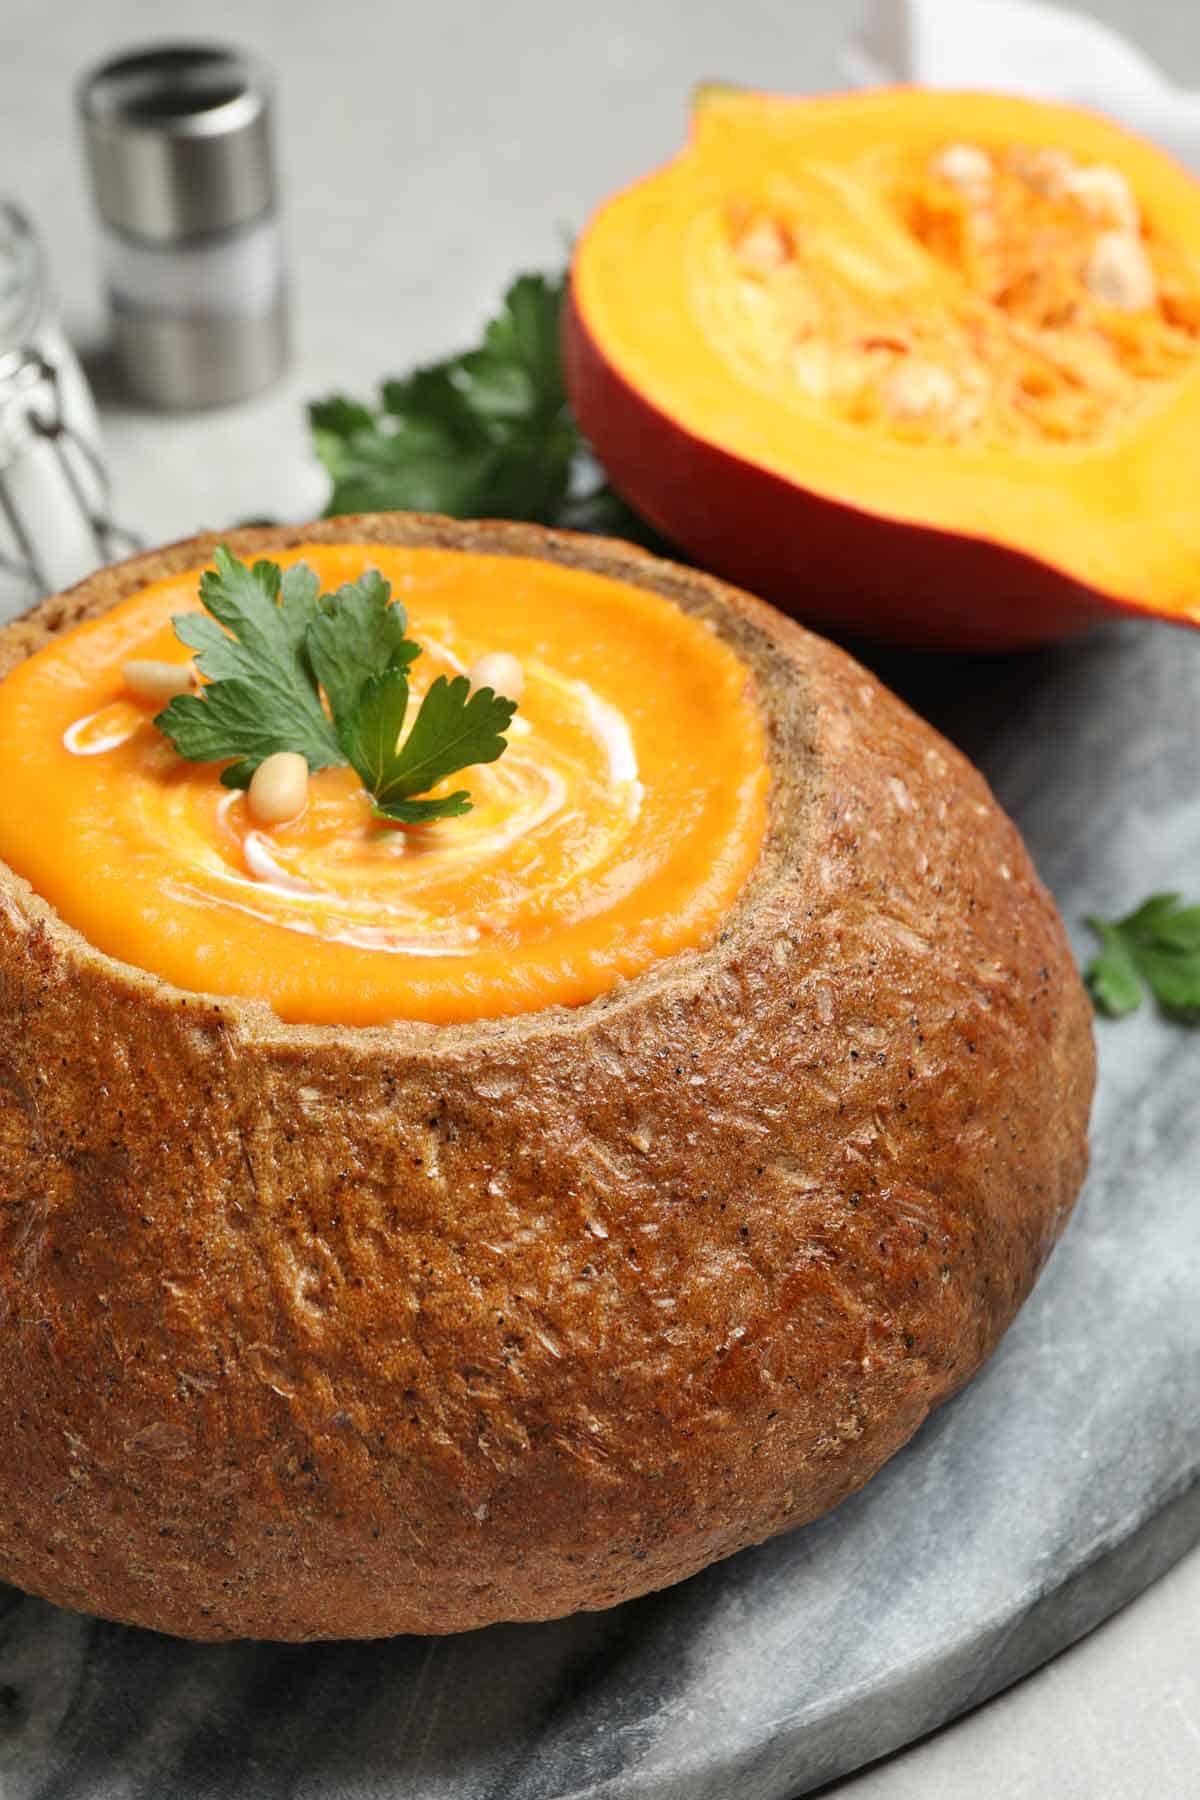 Bread bowl filled with pumpkin soup and garnished with parsley and pine nuts.